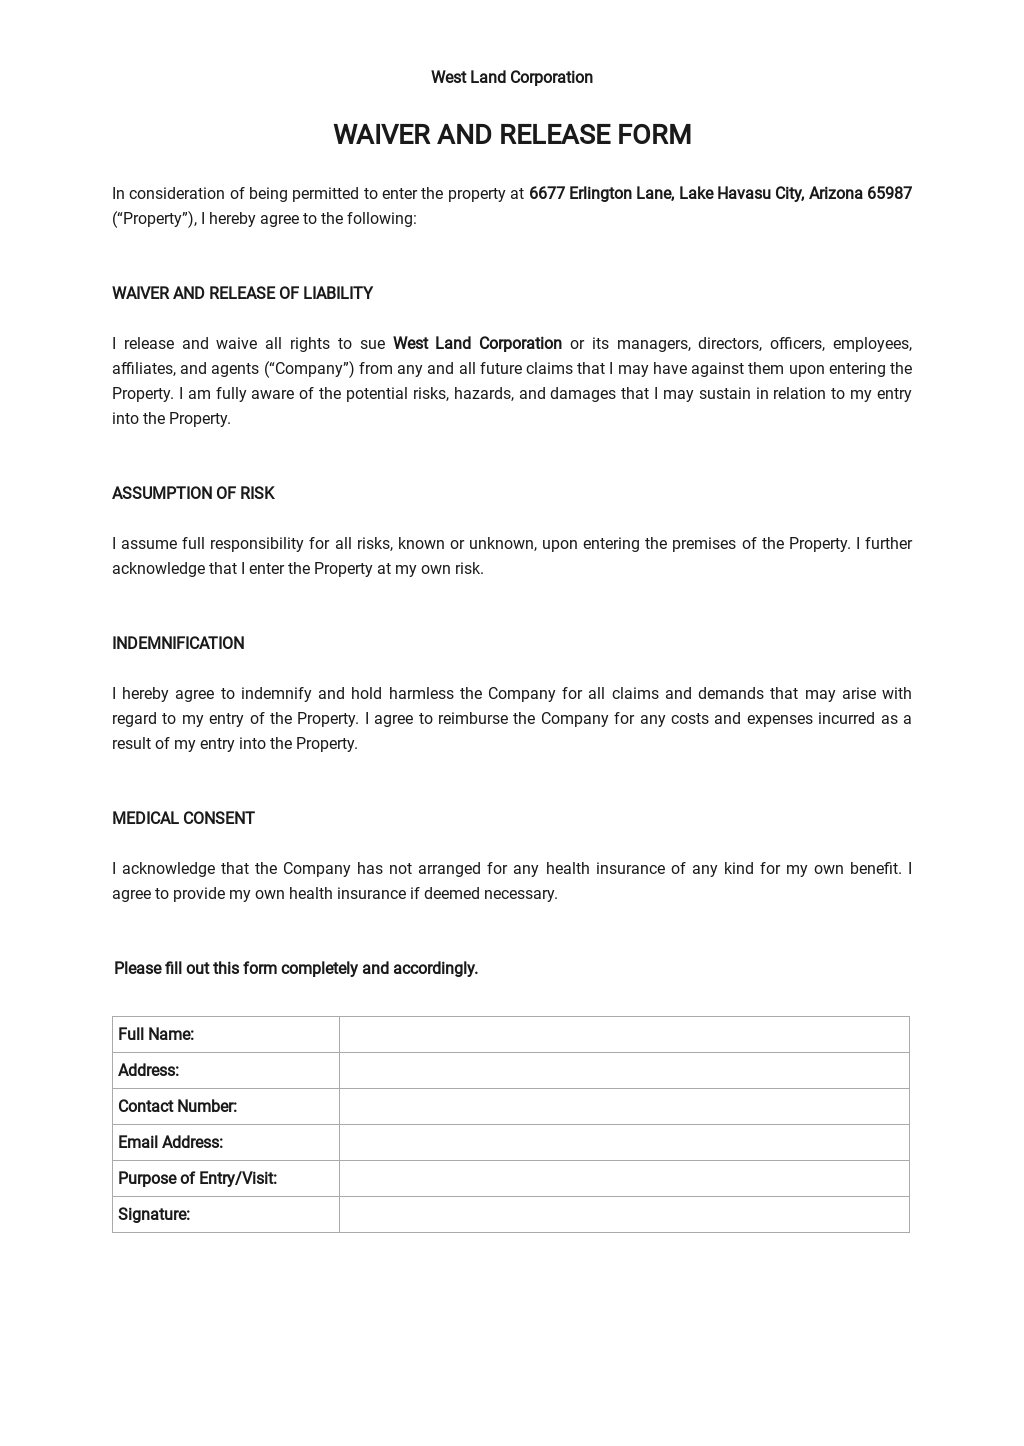 Waiver and Release Form Template